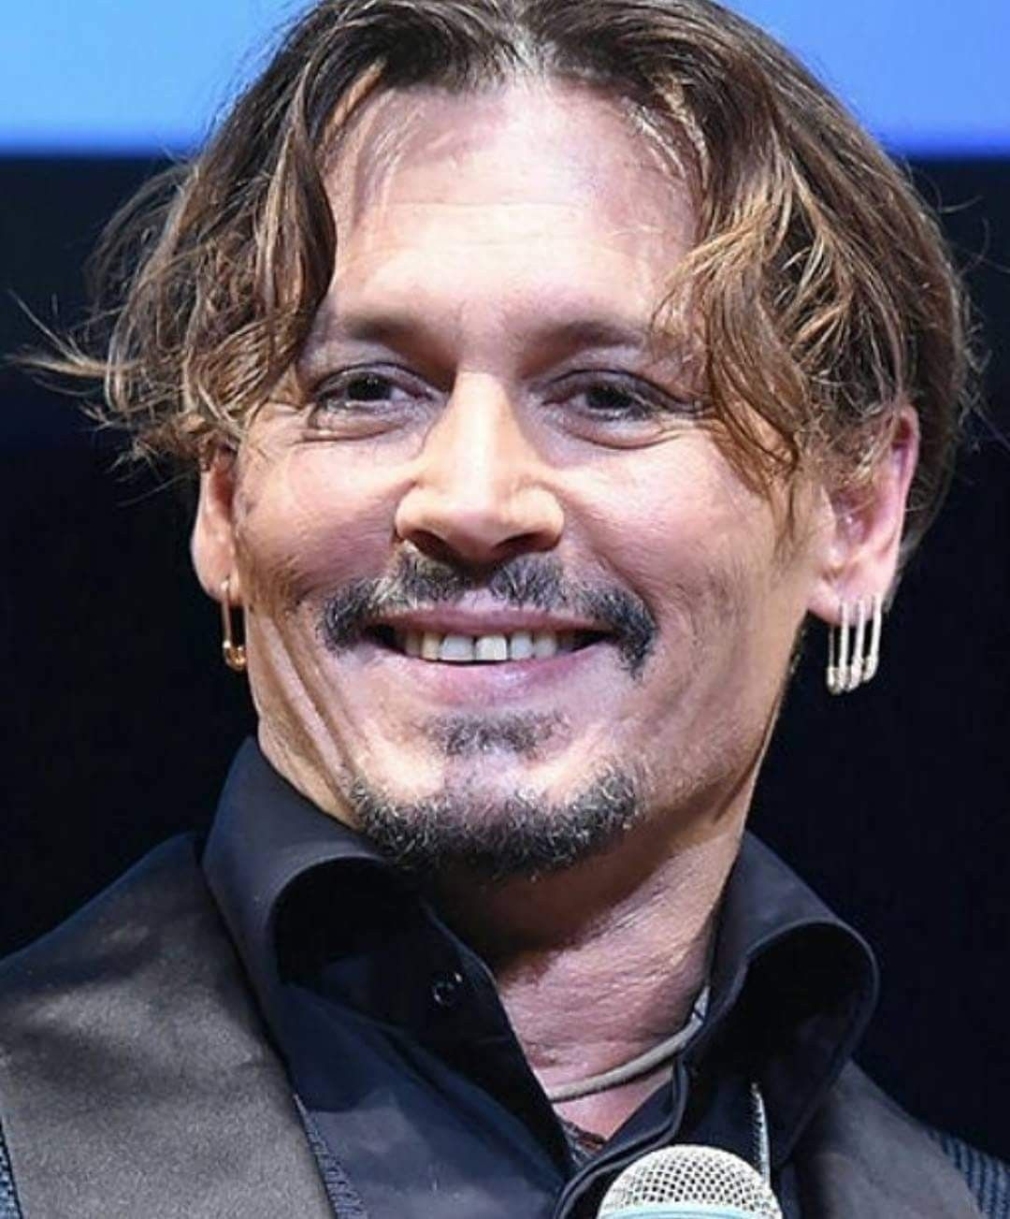 Johnny Depp gets trolled for his rotten teeth at Cannes Celebrity